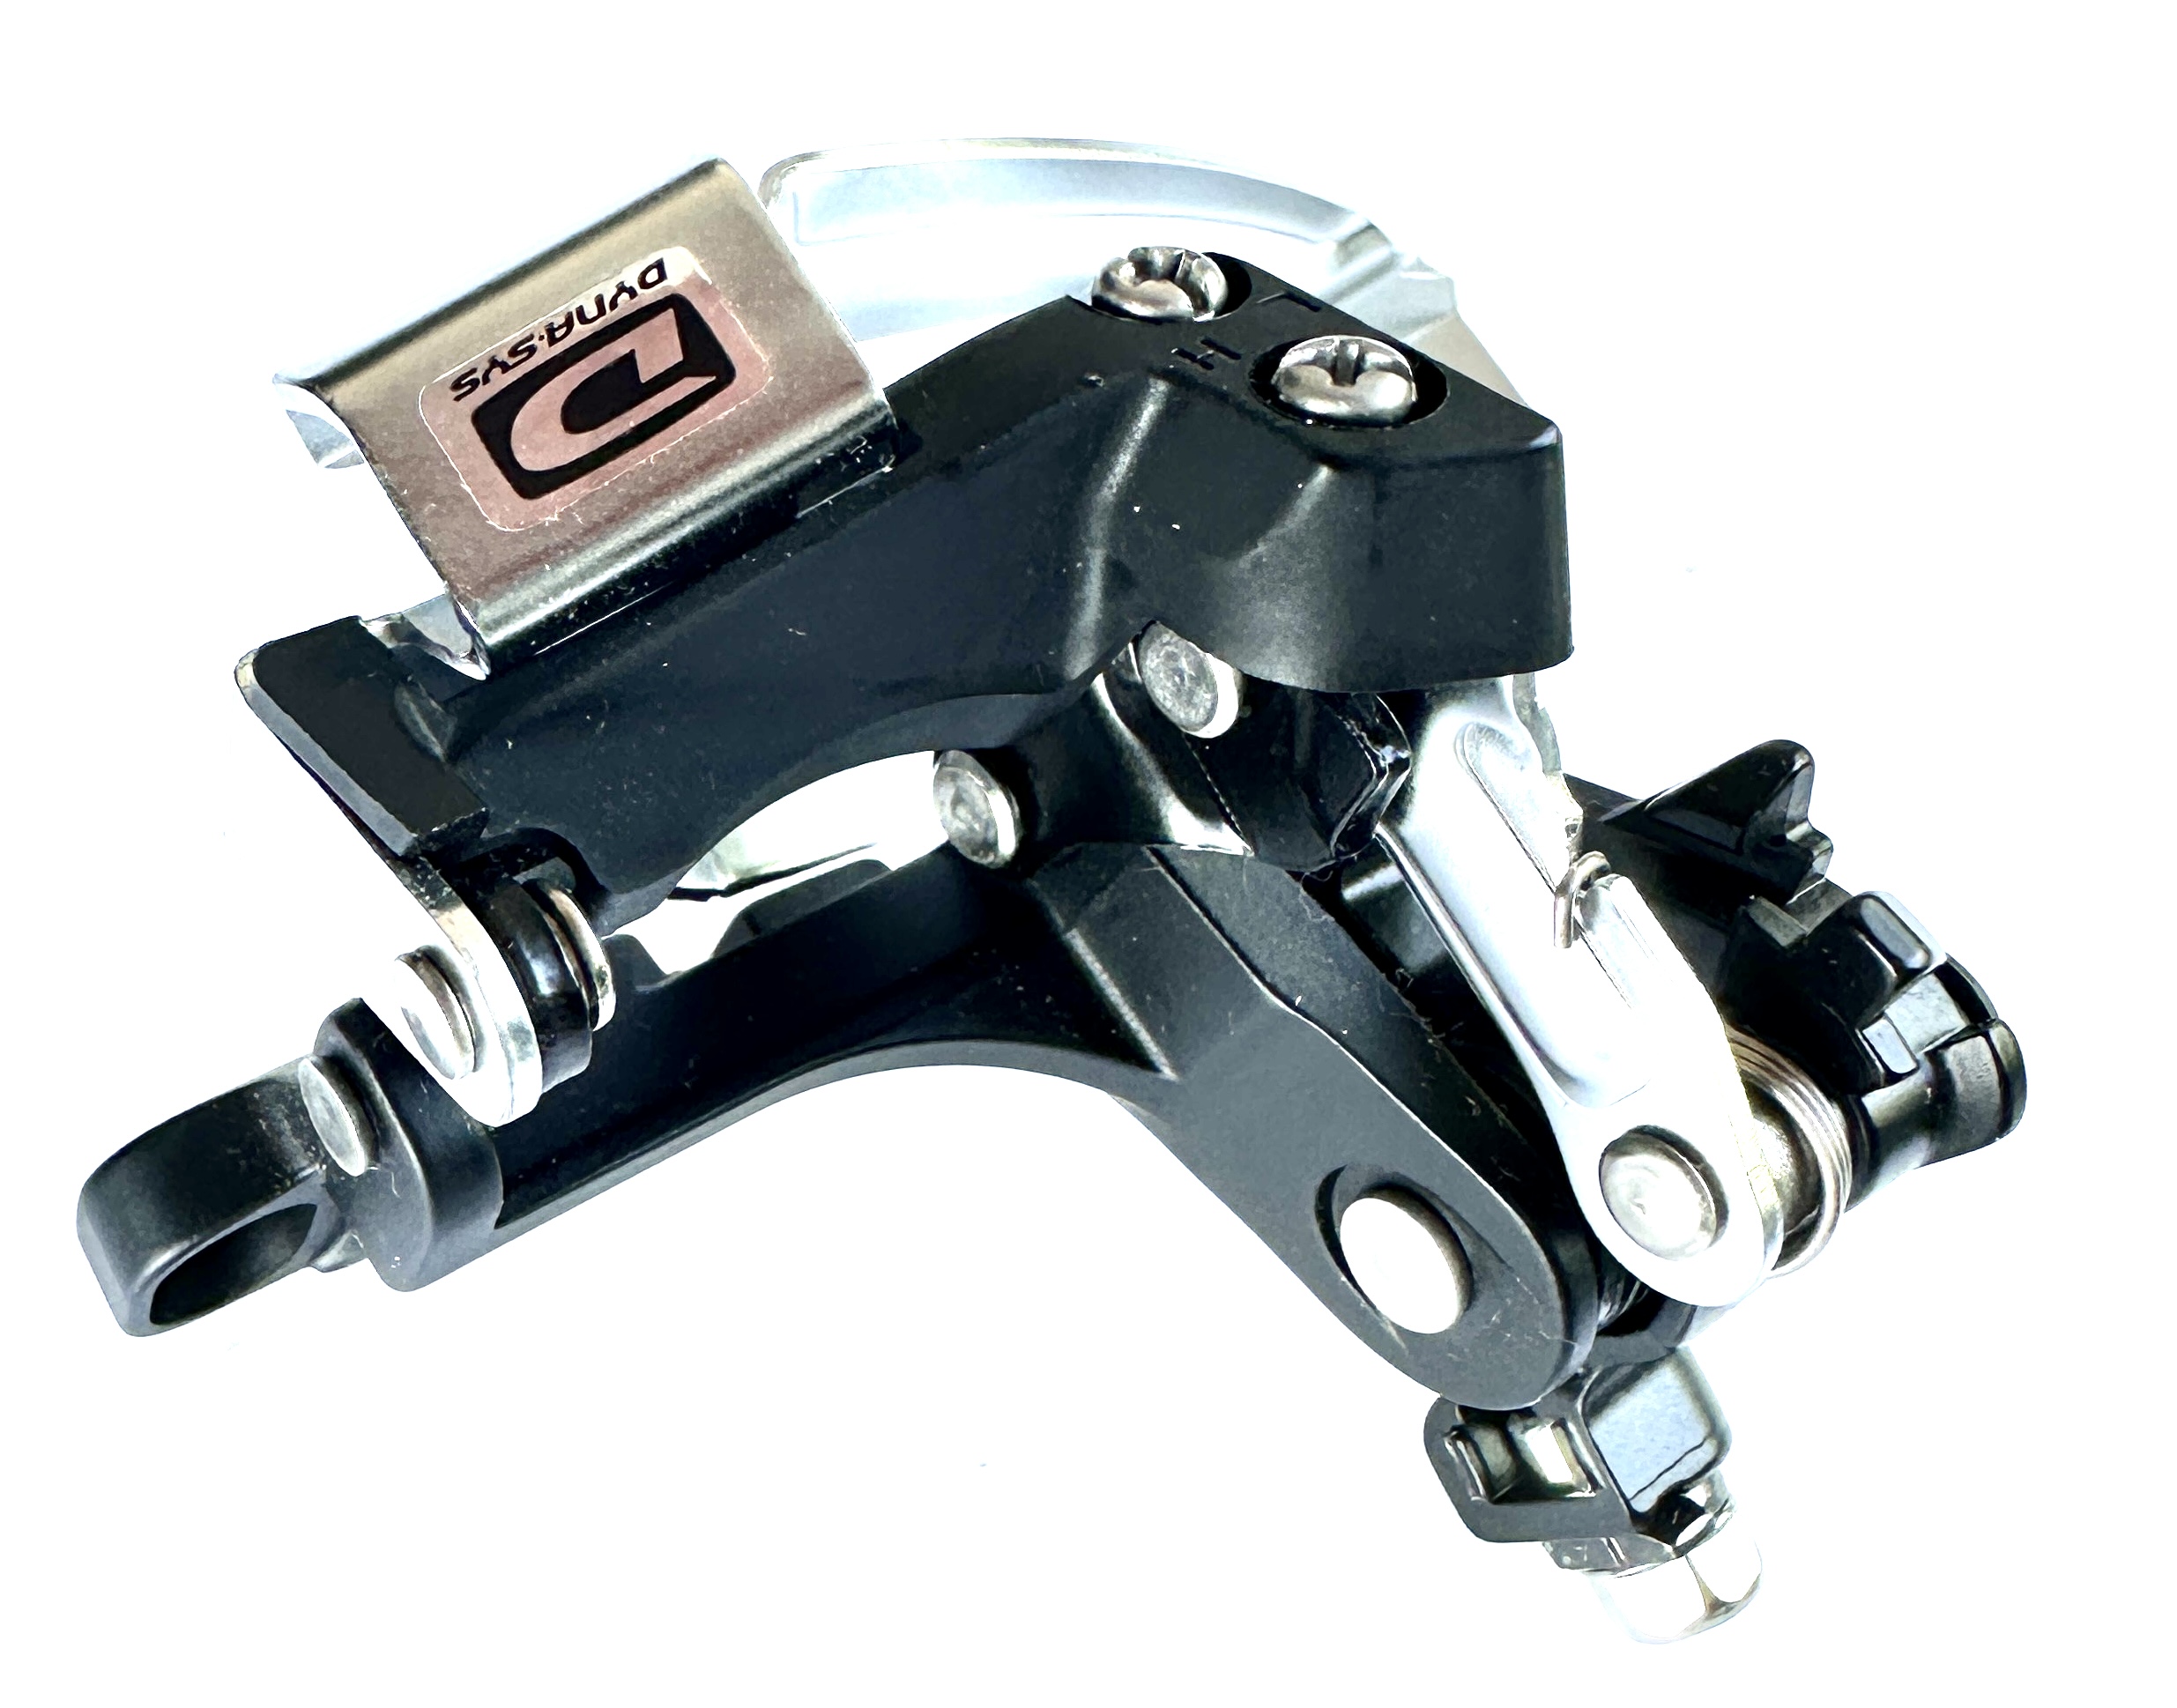 DEORE SLX front derailleur from Shimano